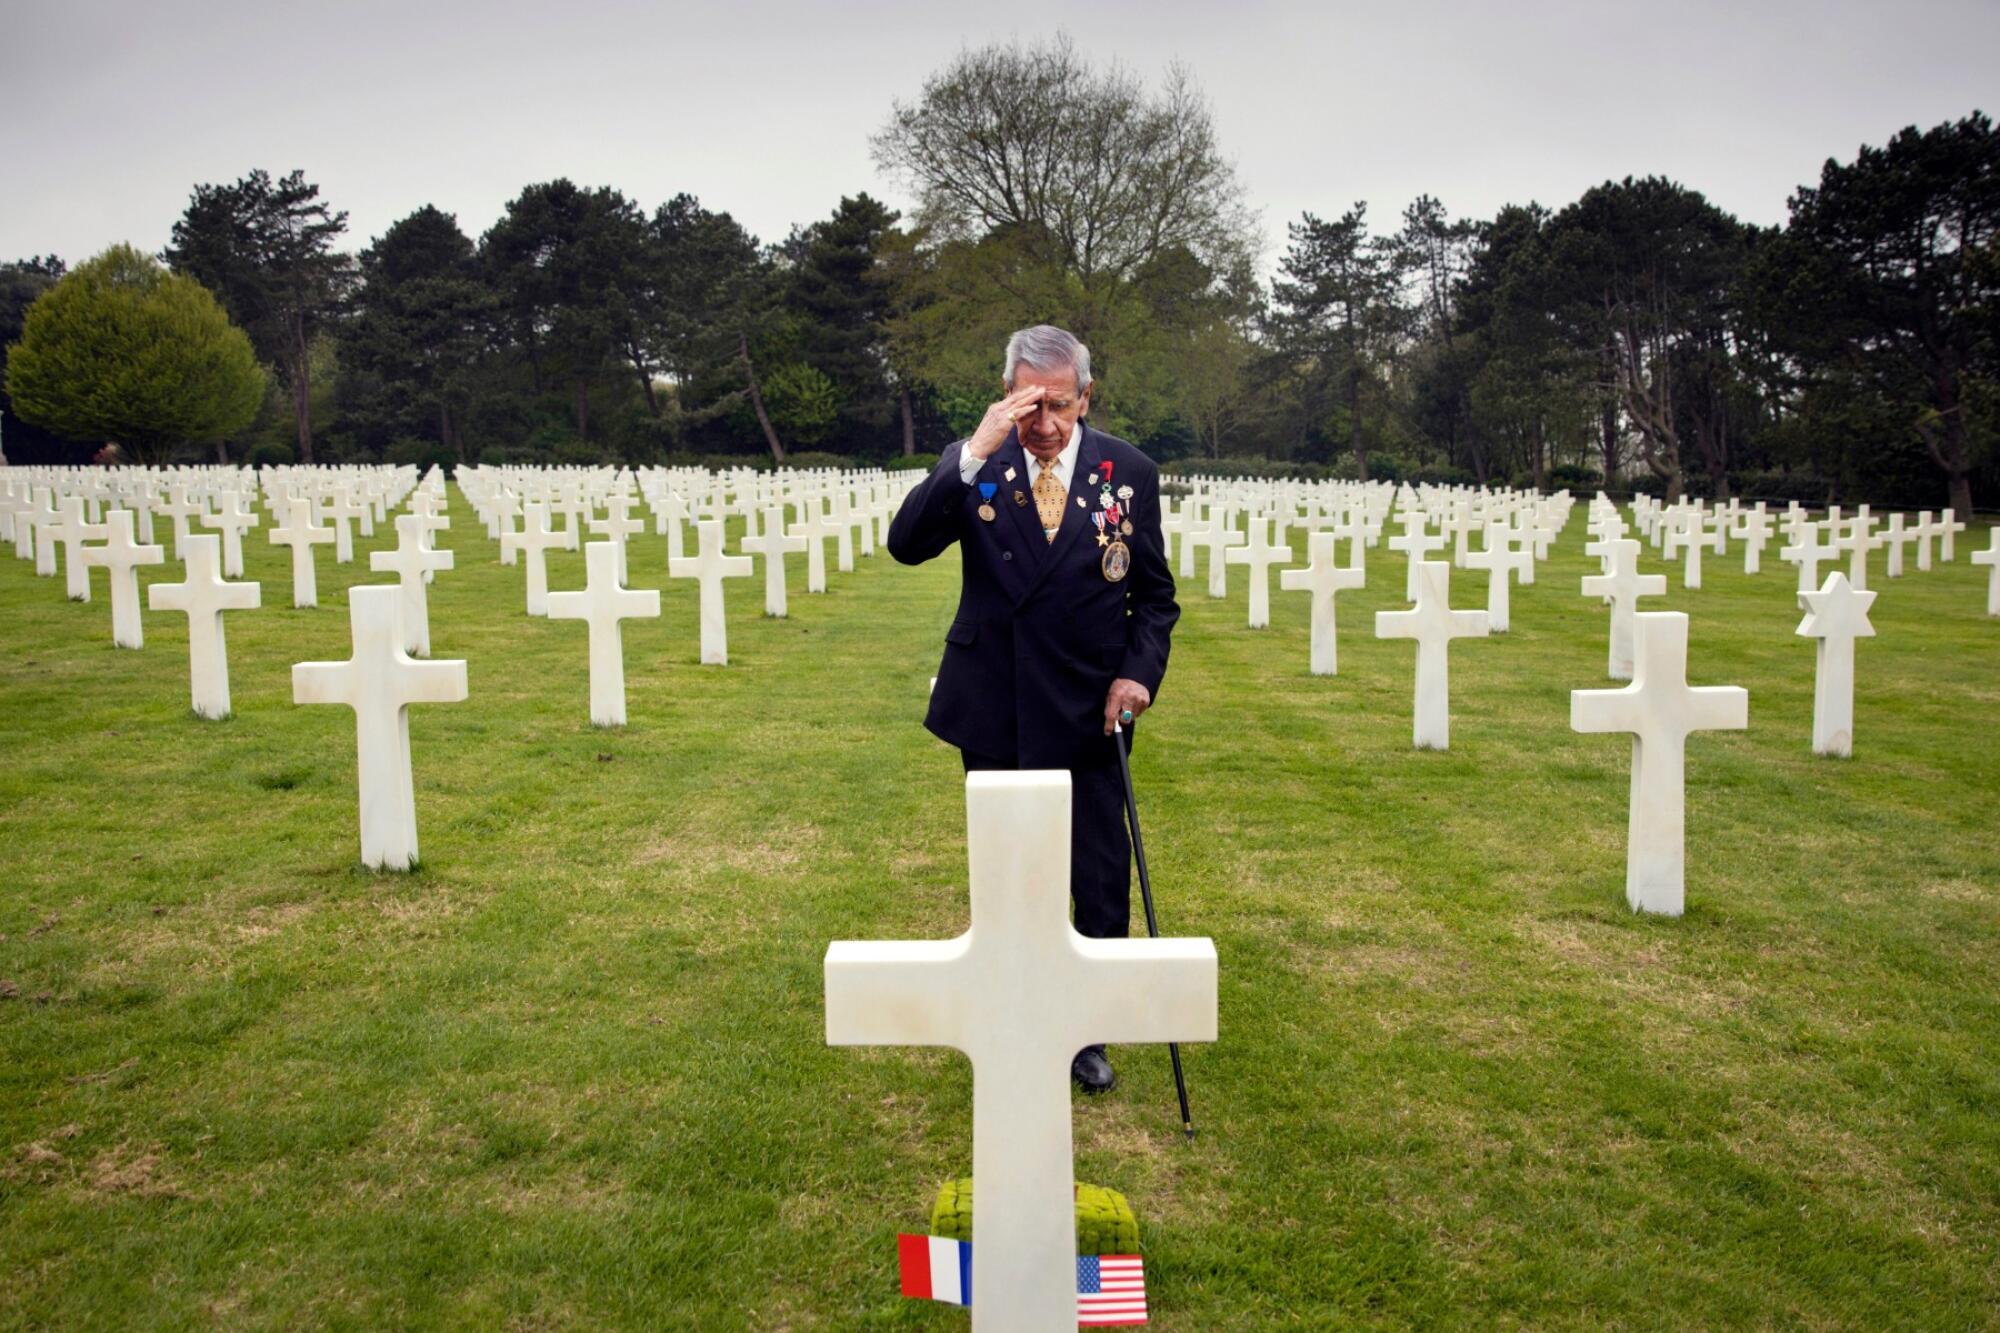 World War II and D-day veteran Charles Norman Shay from Indian Island, Me., salutes the grave of fellow soldier Edward Morozewicz at the Normandy American Cemetery in Colleville-sur-Mer in France in 2019.